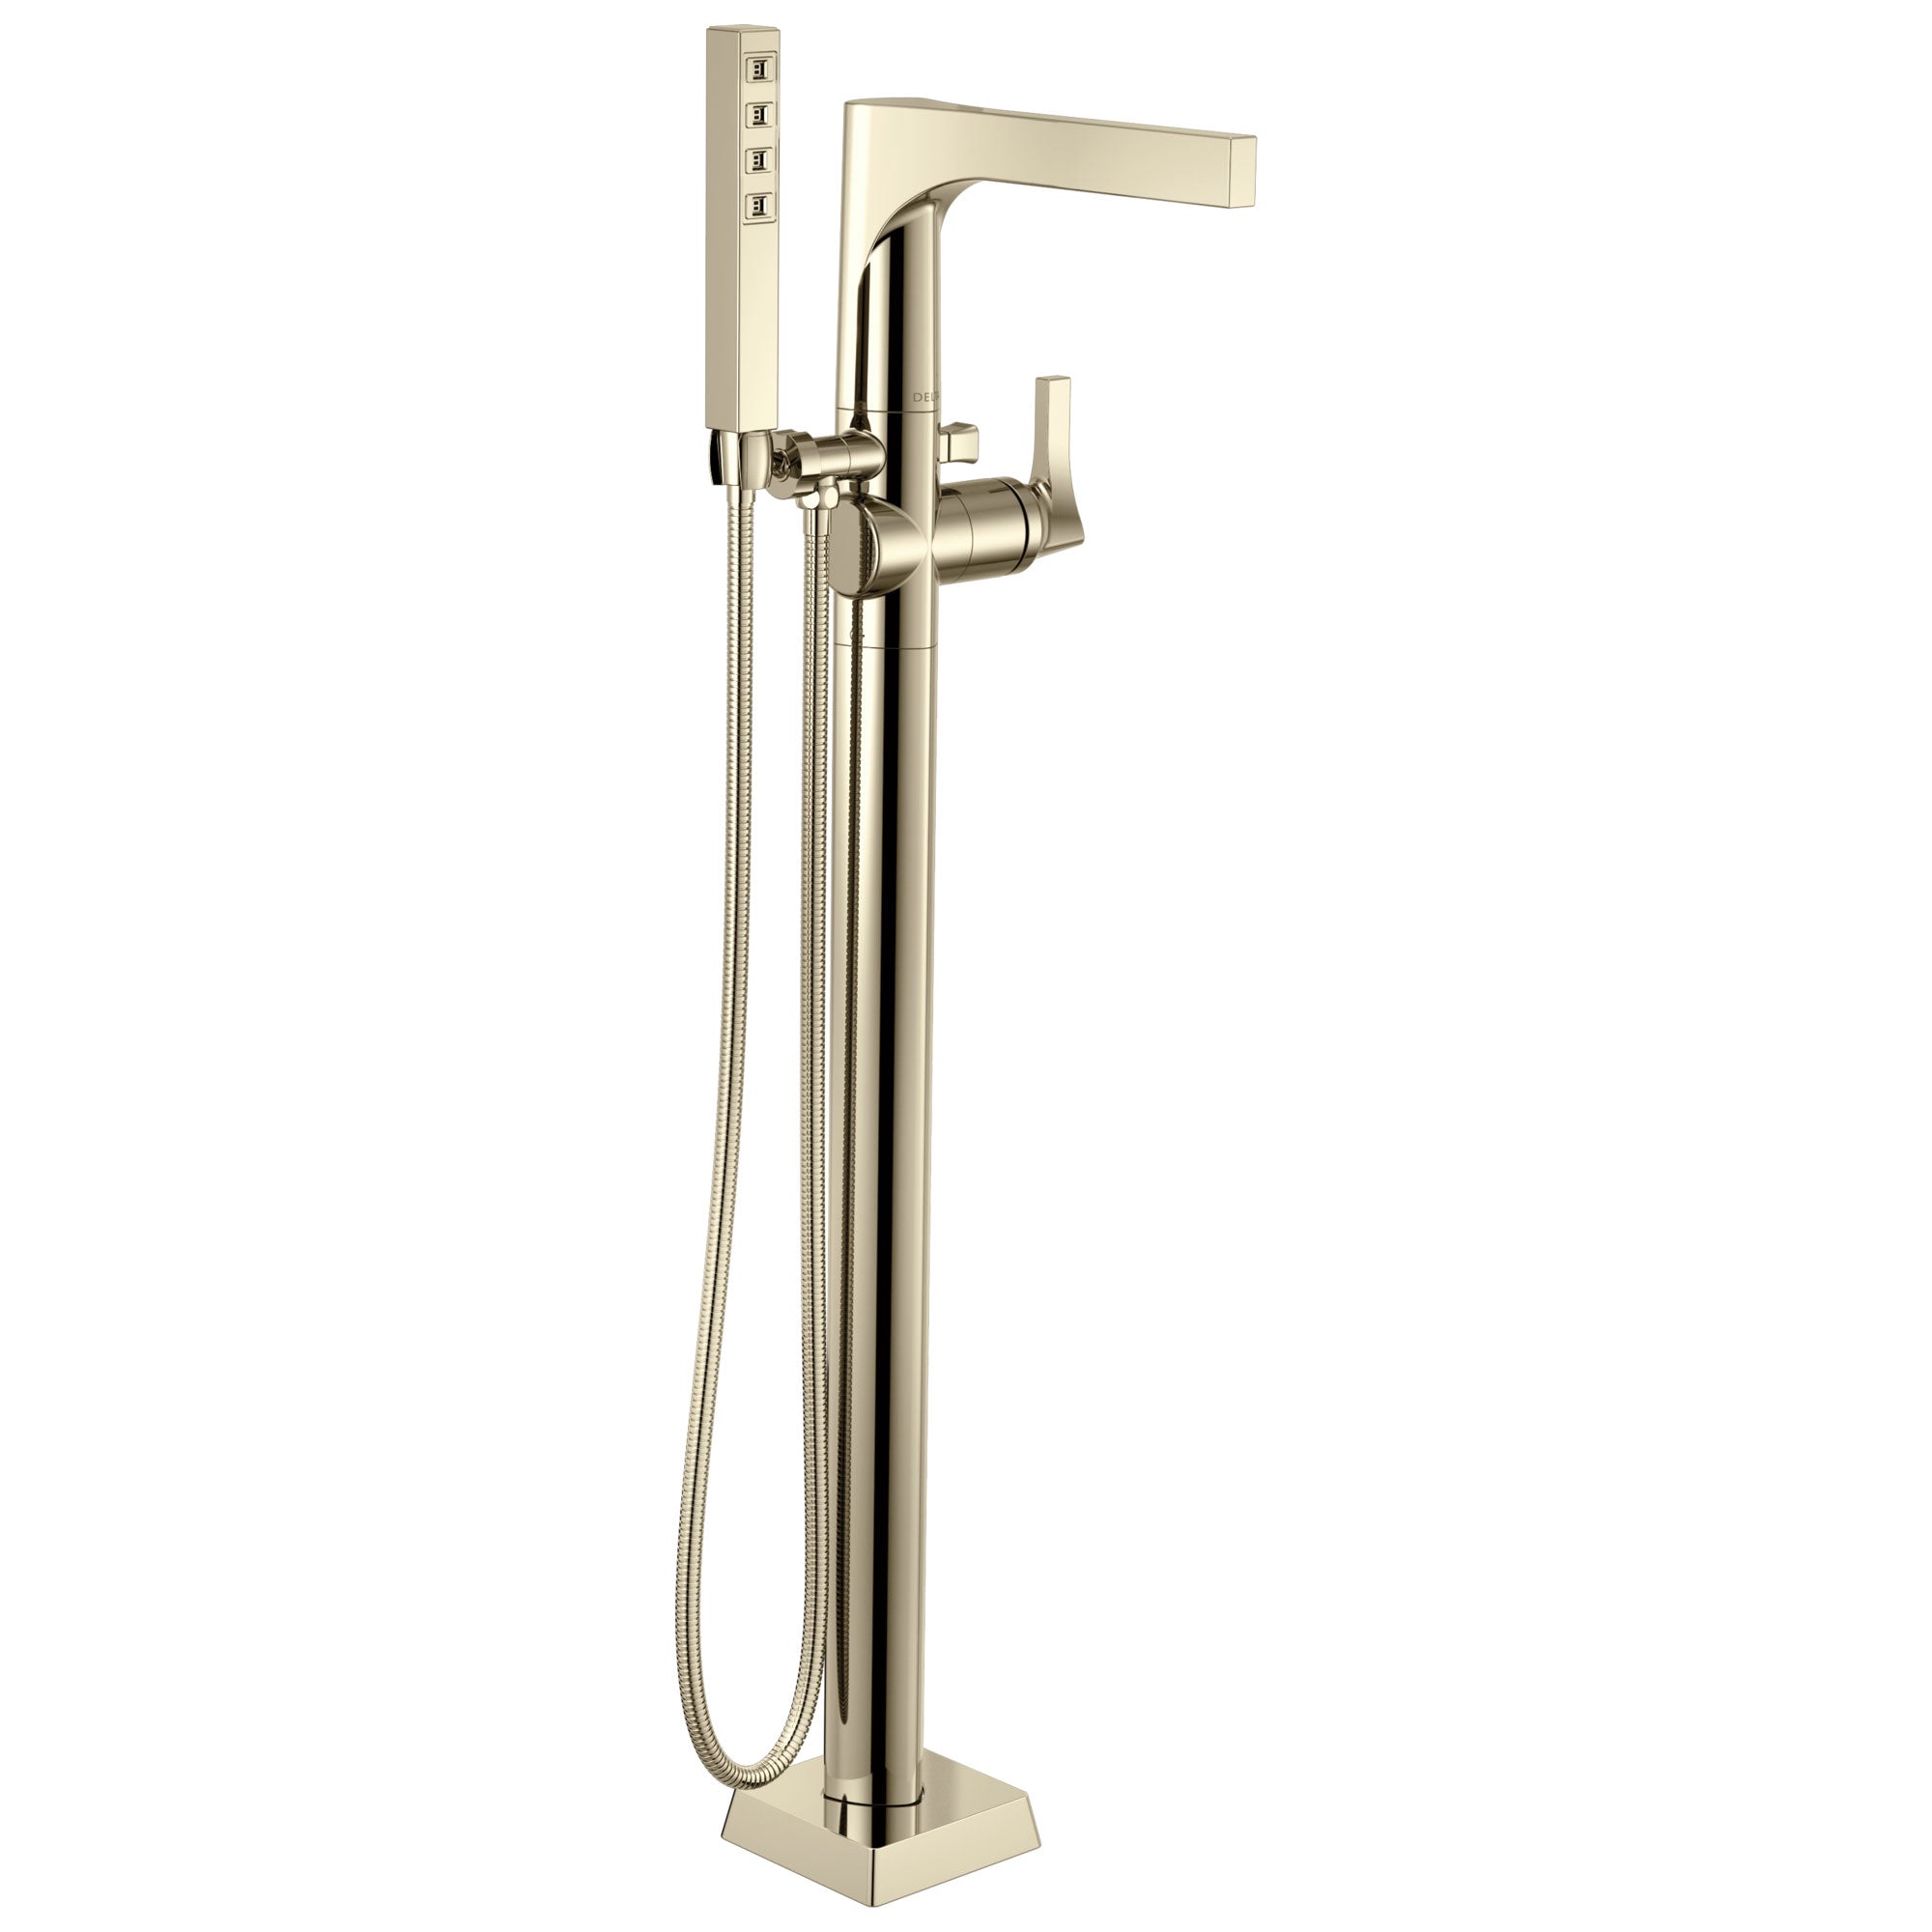 Delta Zura Collection Polished Nickel Modern Floor Mount Freestanding Tub Filler Faucet with Hand Shower Includes Trim Kit and Rough-in Valve D2067V